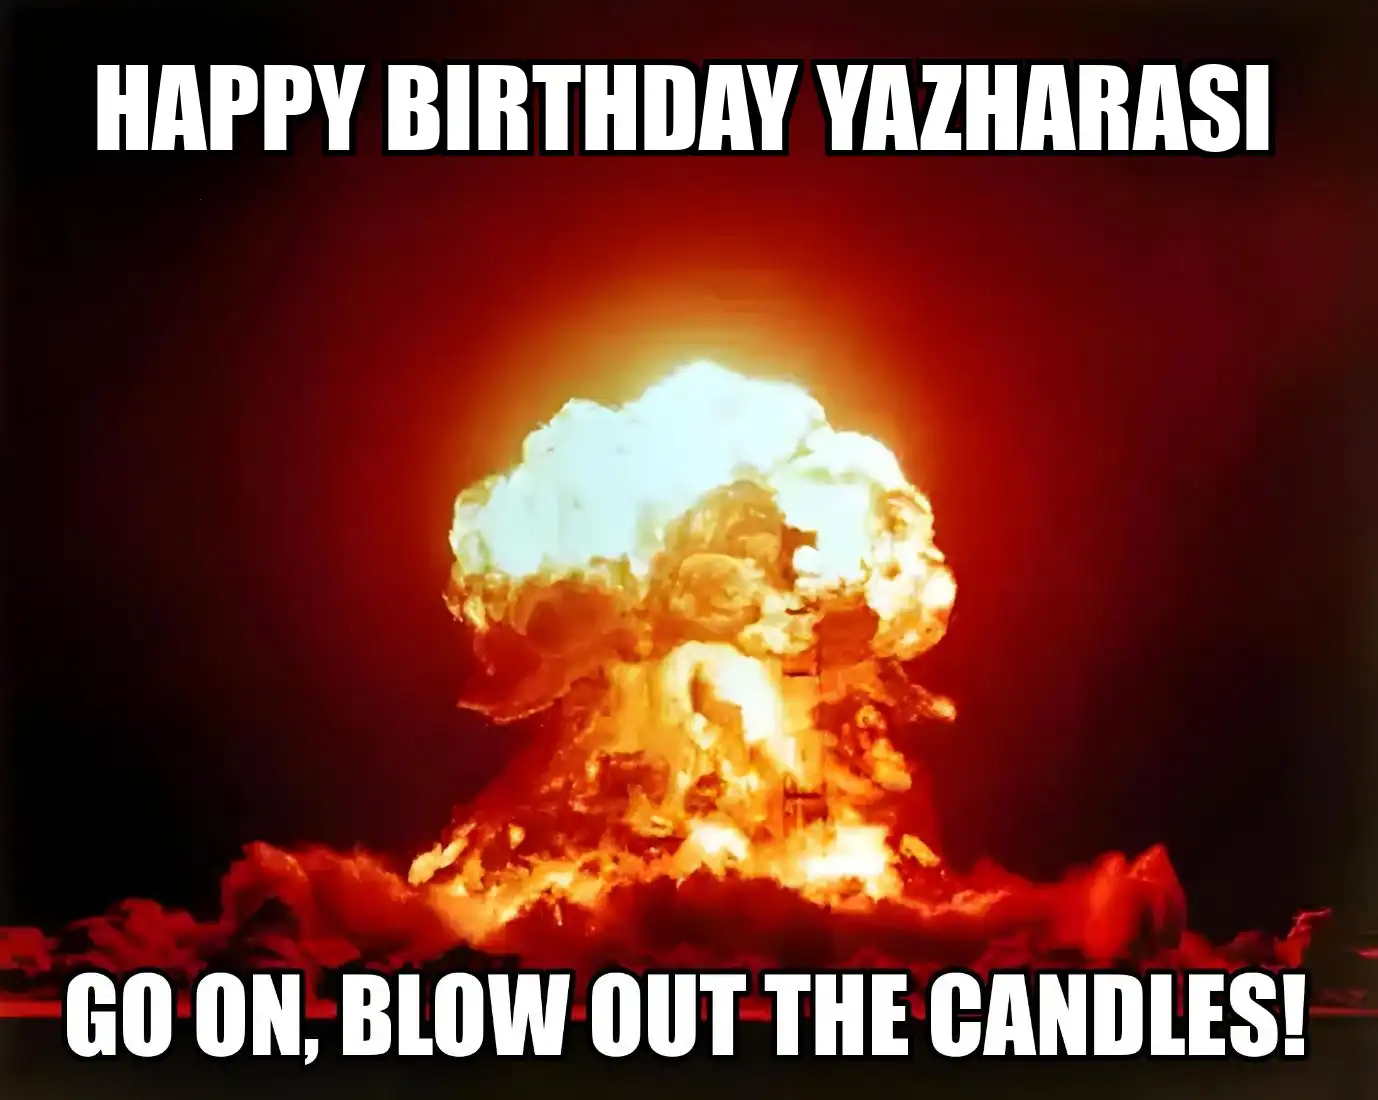 Happy Birthday Yazharasi Go On Blow Out The Candles Meme